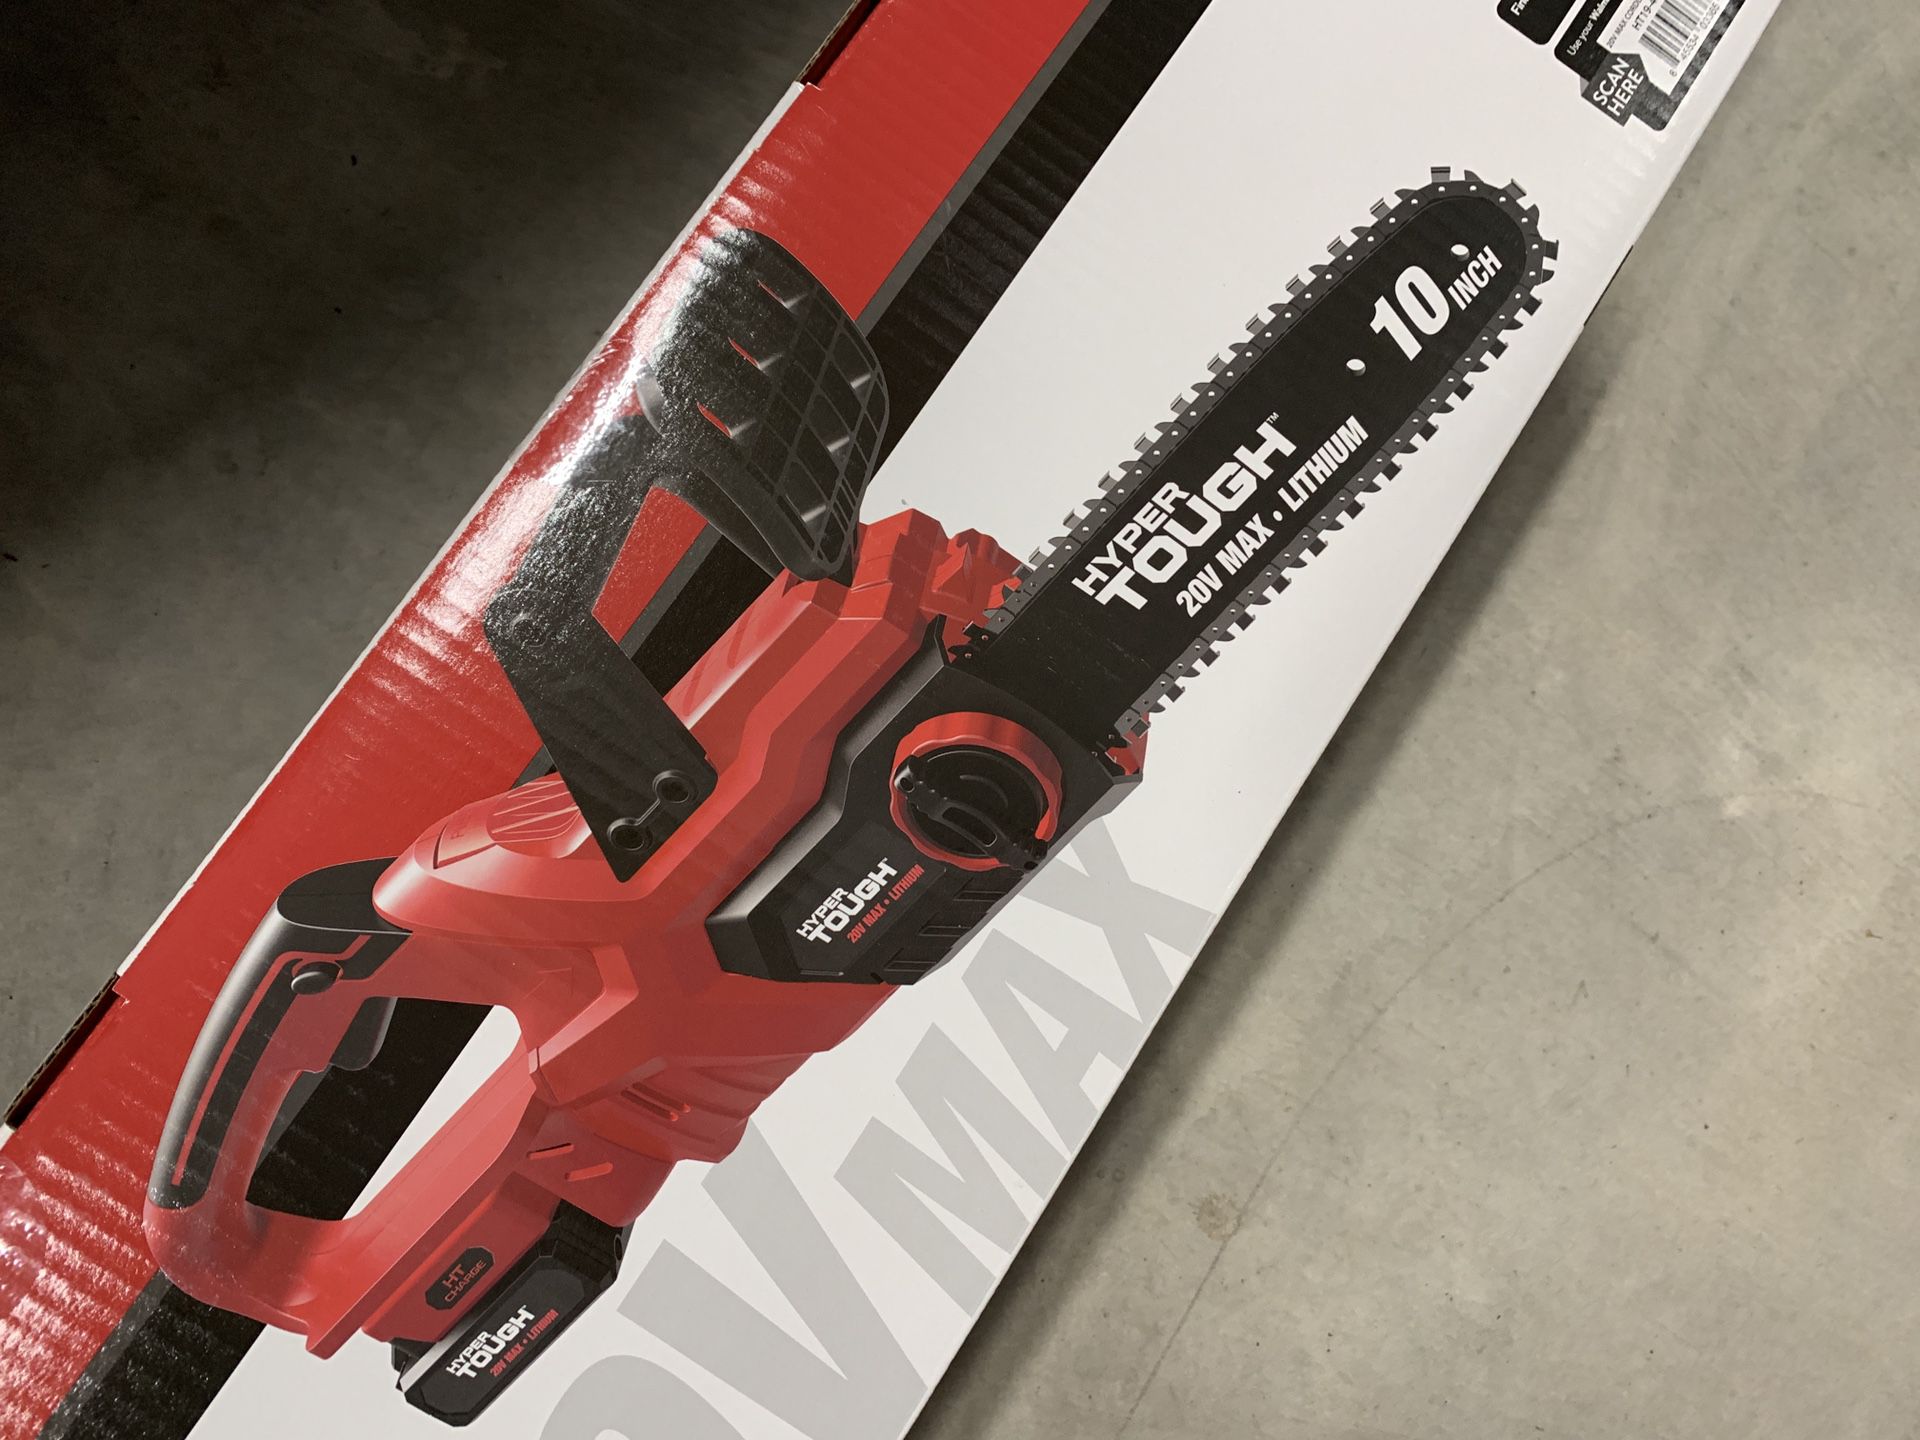 Cordless electric chainsaw